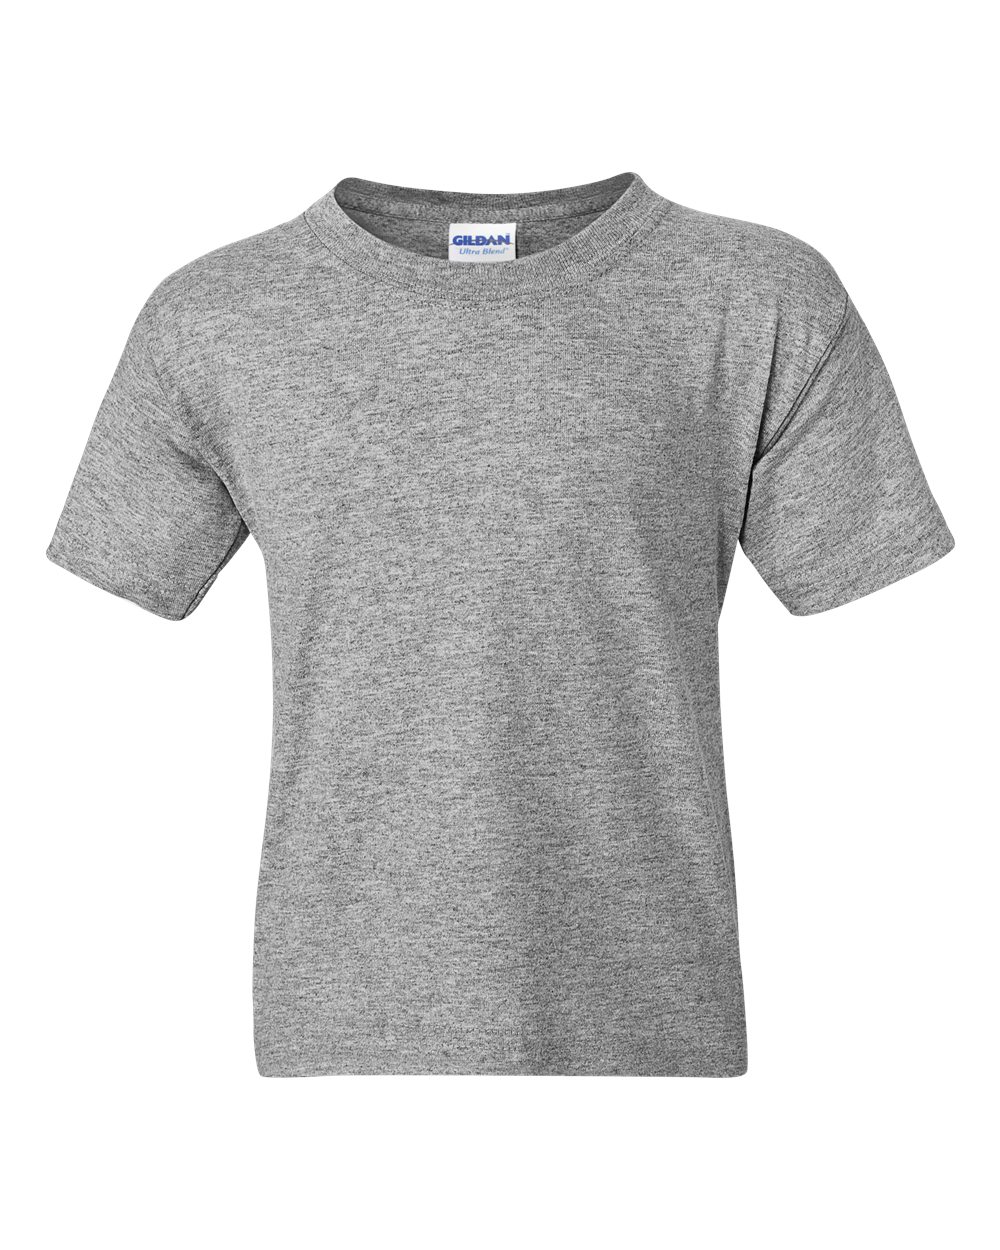 click to view sport grey